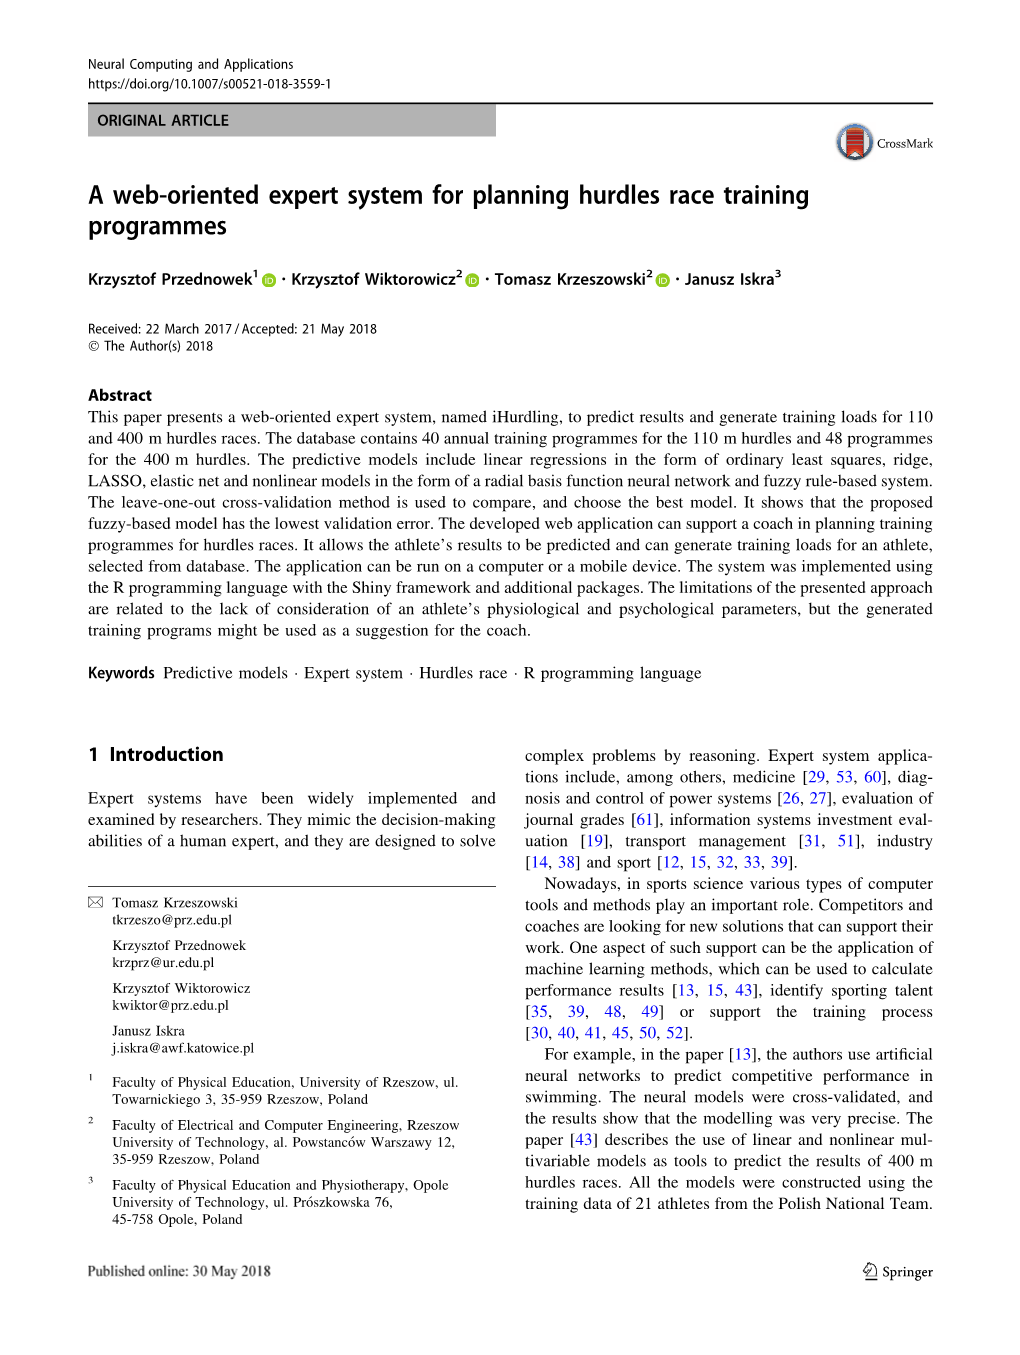 A Web-Oriented Expert System for Planning Hurdles Race Training Programmes